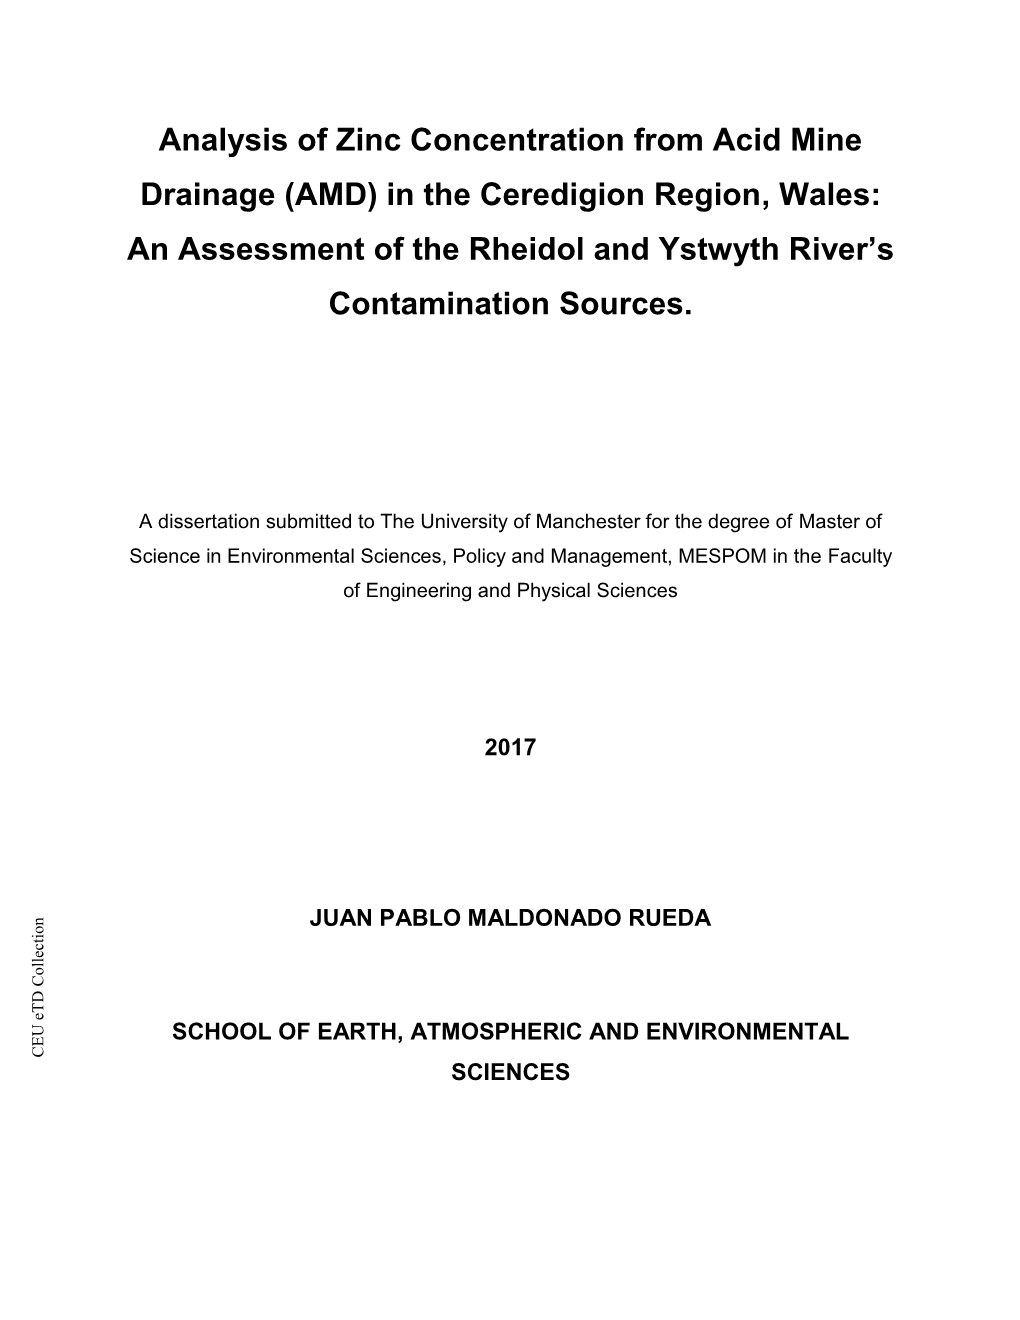 Analysis of Zinc Concentration from Acid Mine Drainage (AMD) in the Ceredigion Region, Wales: an Assessment of the Rheidol and Ystwyth River’S Contamination Sources